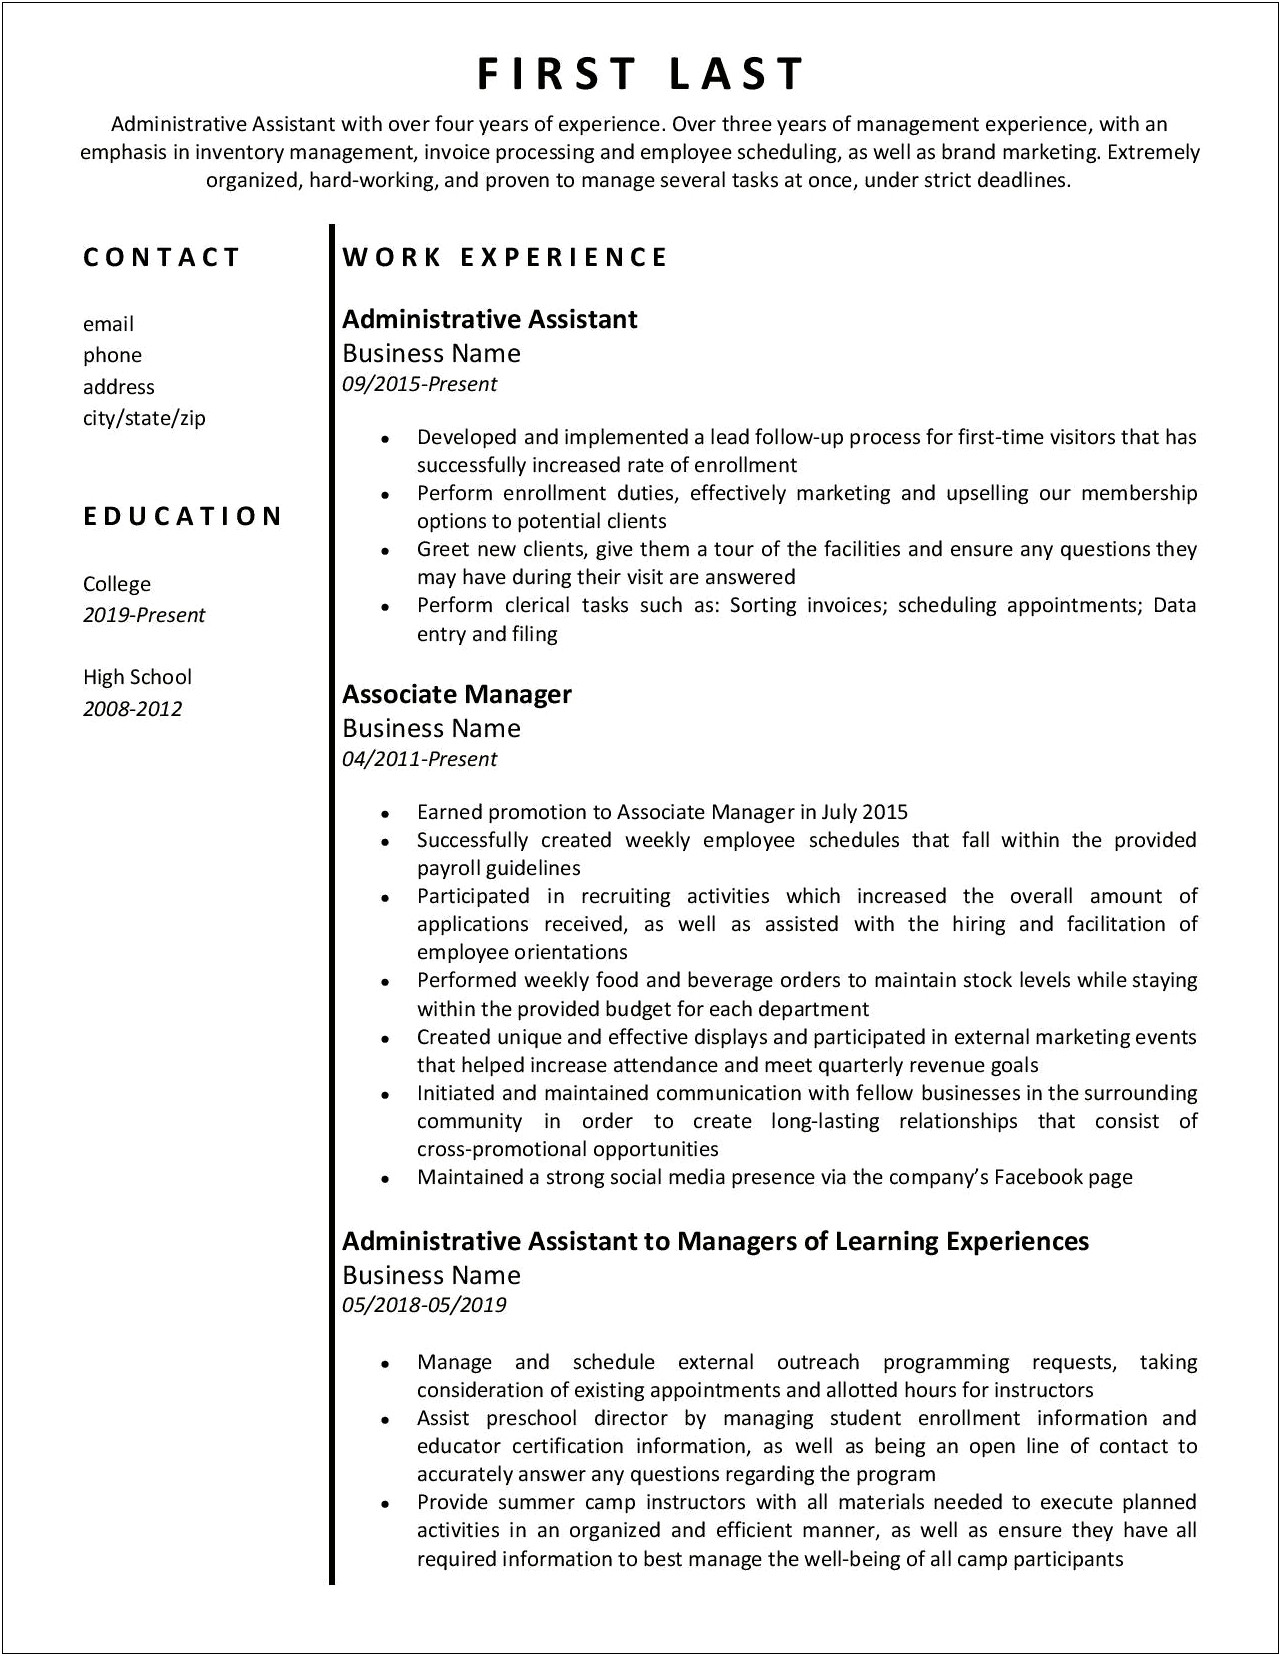 Work History On Resume Concurrent Jobs